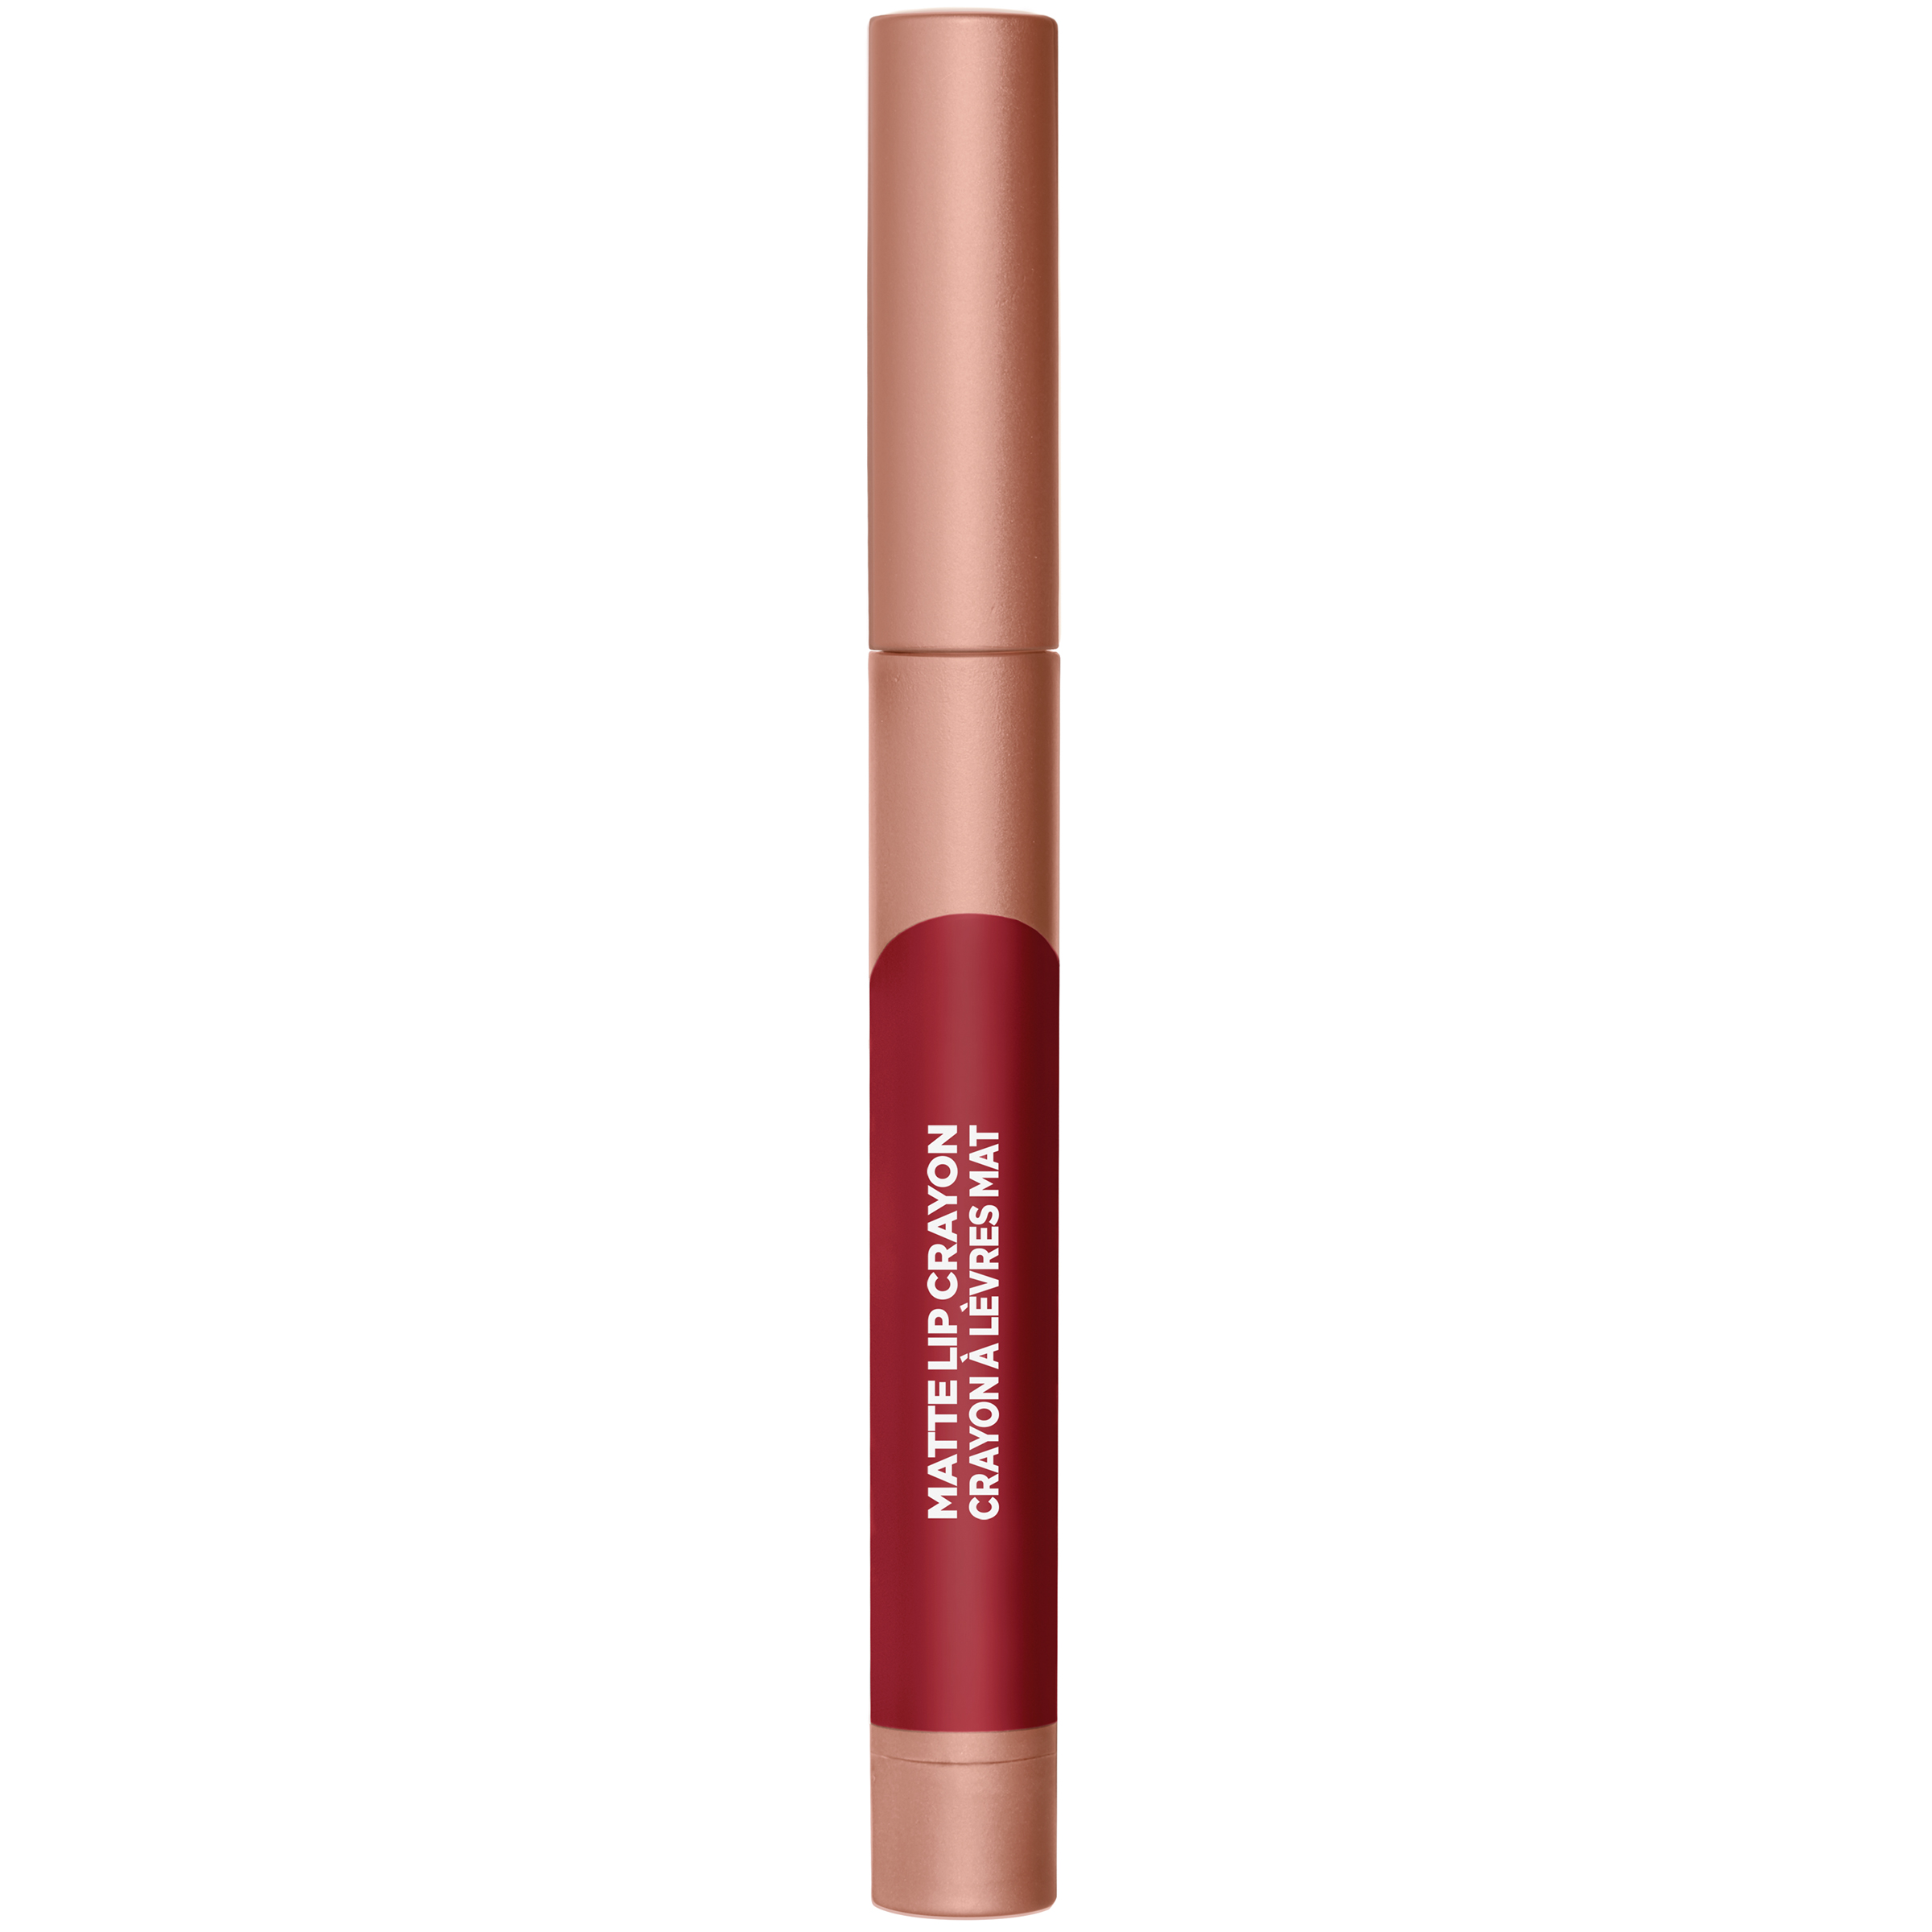 L'Oreal Paris Infallible Matte Lip Crayon, Lasting Wear, Smudge Resistant, Brulee Everyday, 0.04 oz. - image 3 of 4